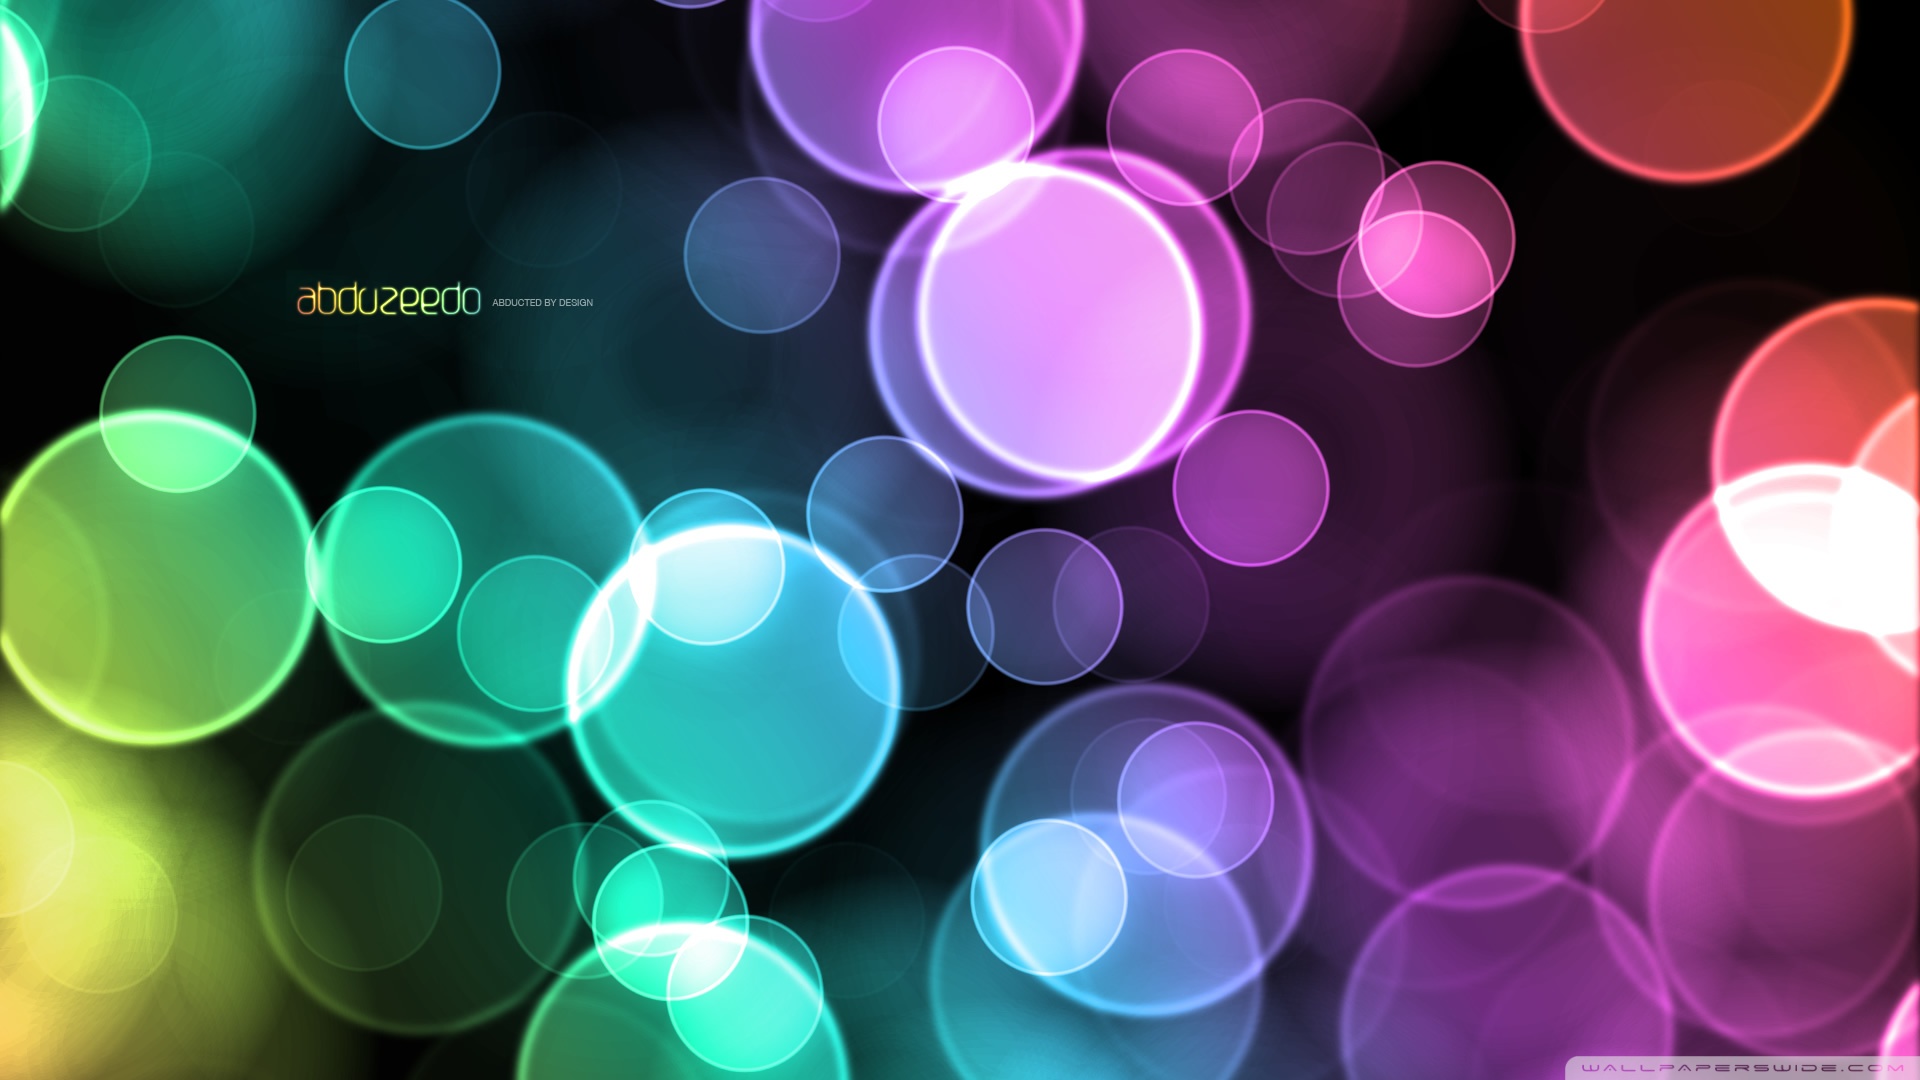  Wallpaper 1920x1080 Abstract Background Colorful Circles Green